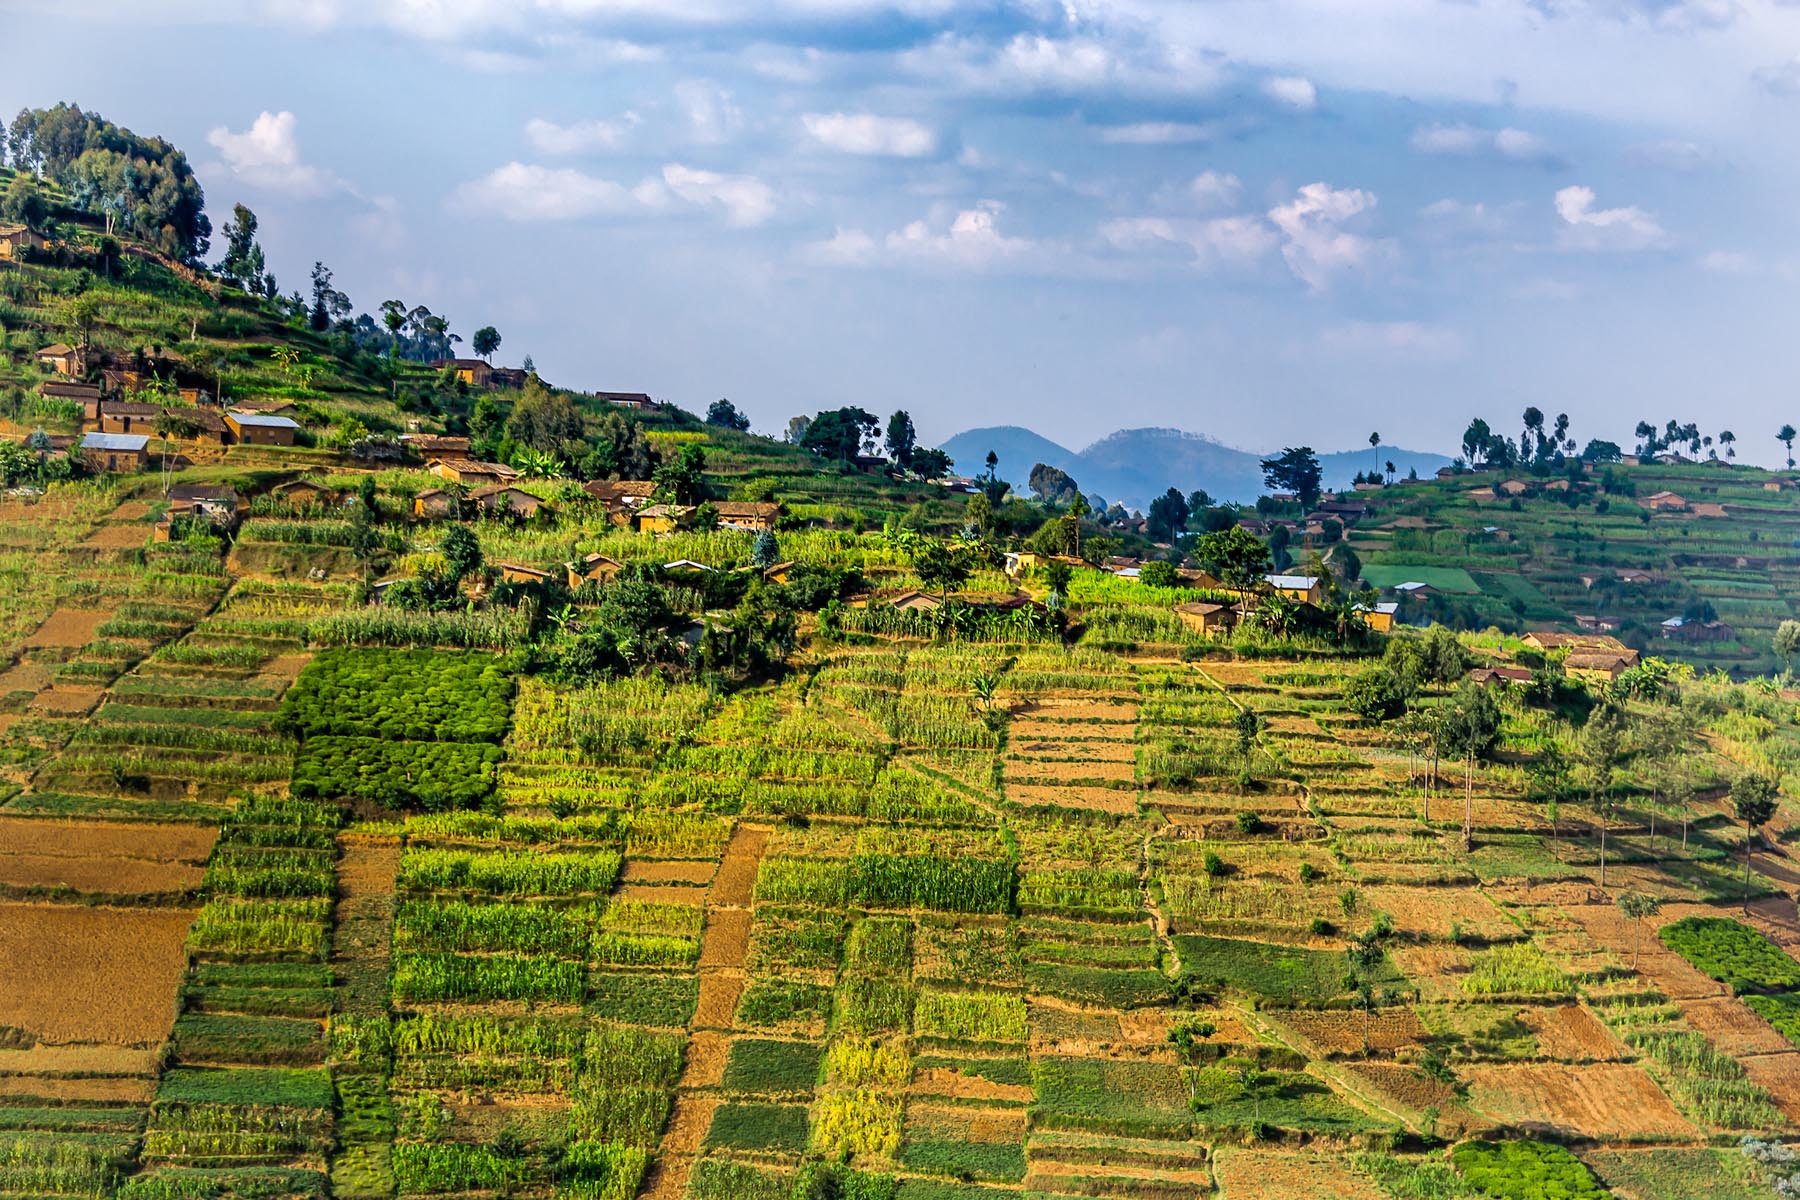 Beautiful rural landscape with agricultures terraces, Rwanda near Nyungwe National Park, Africa